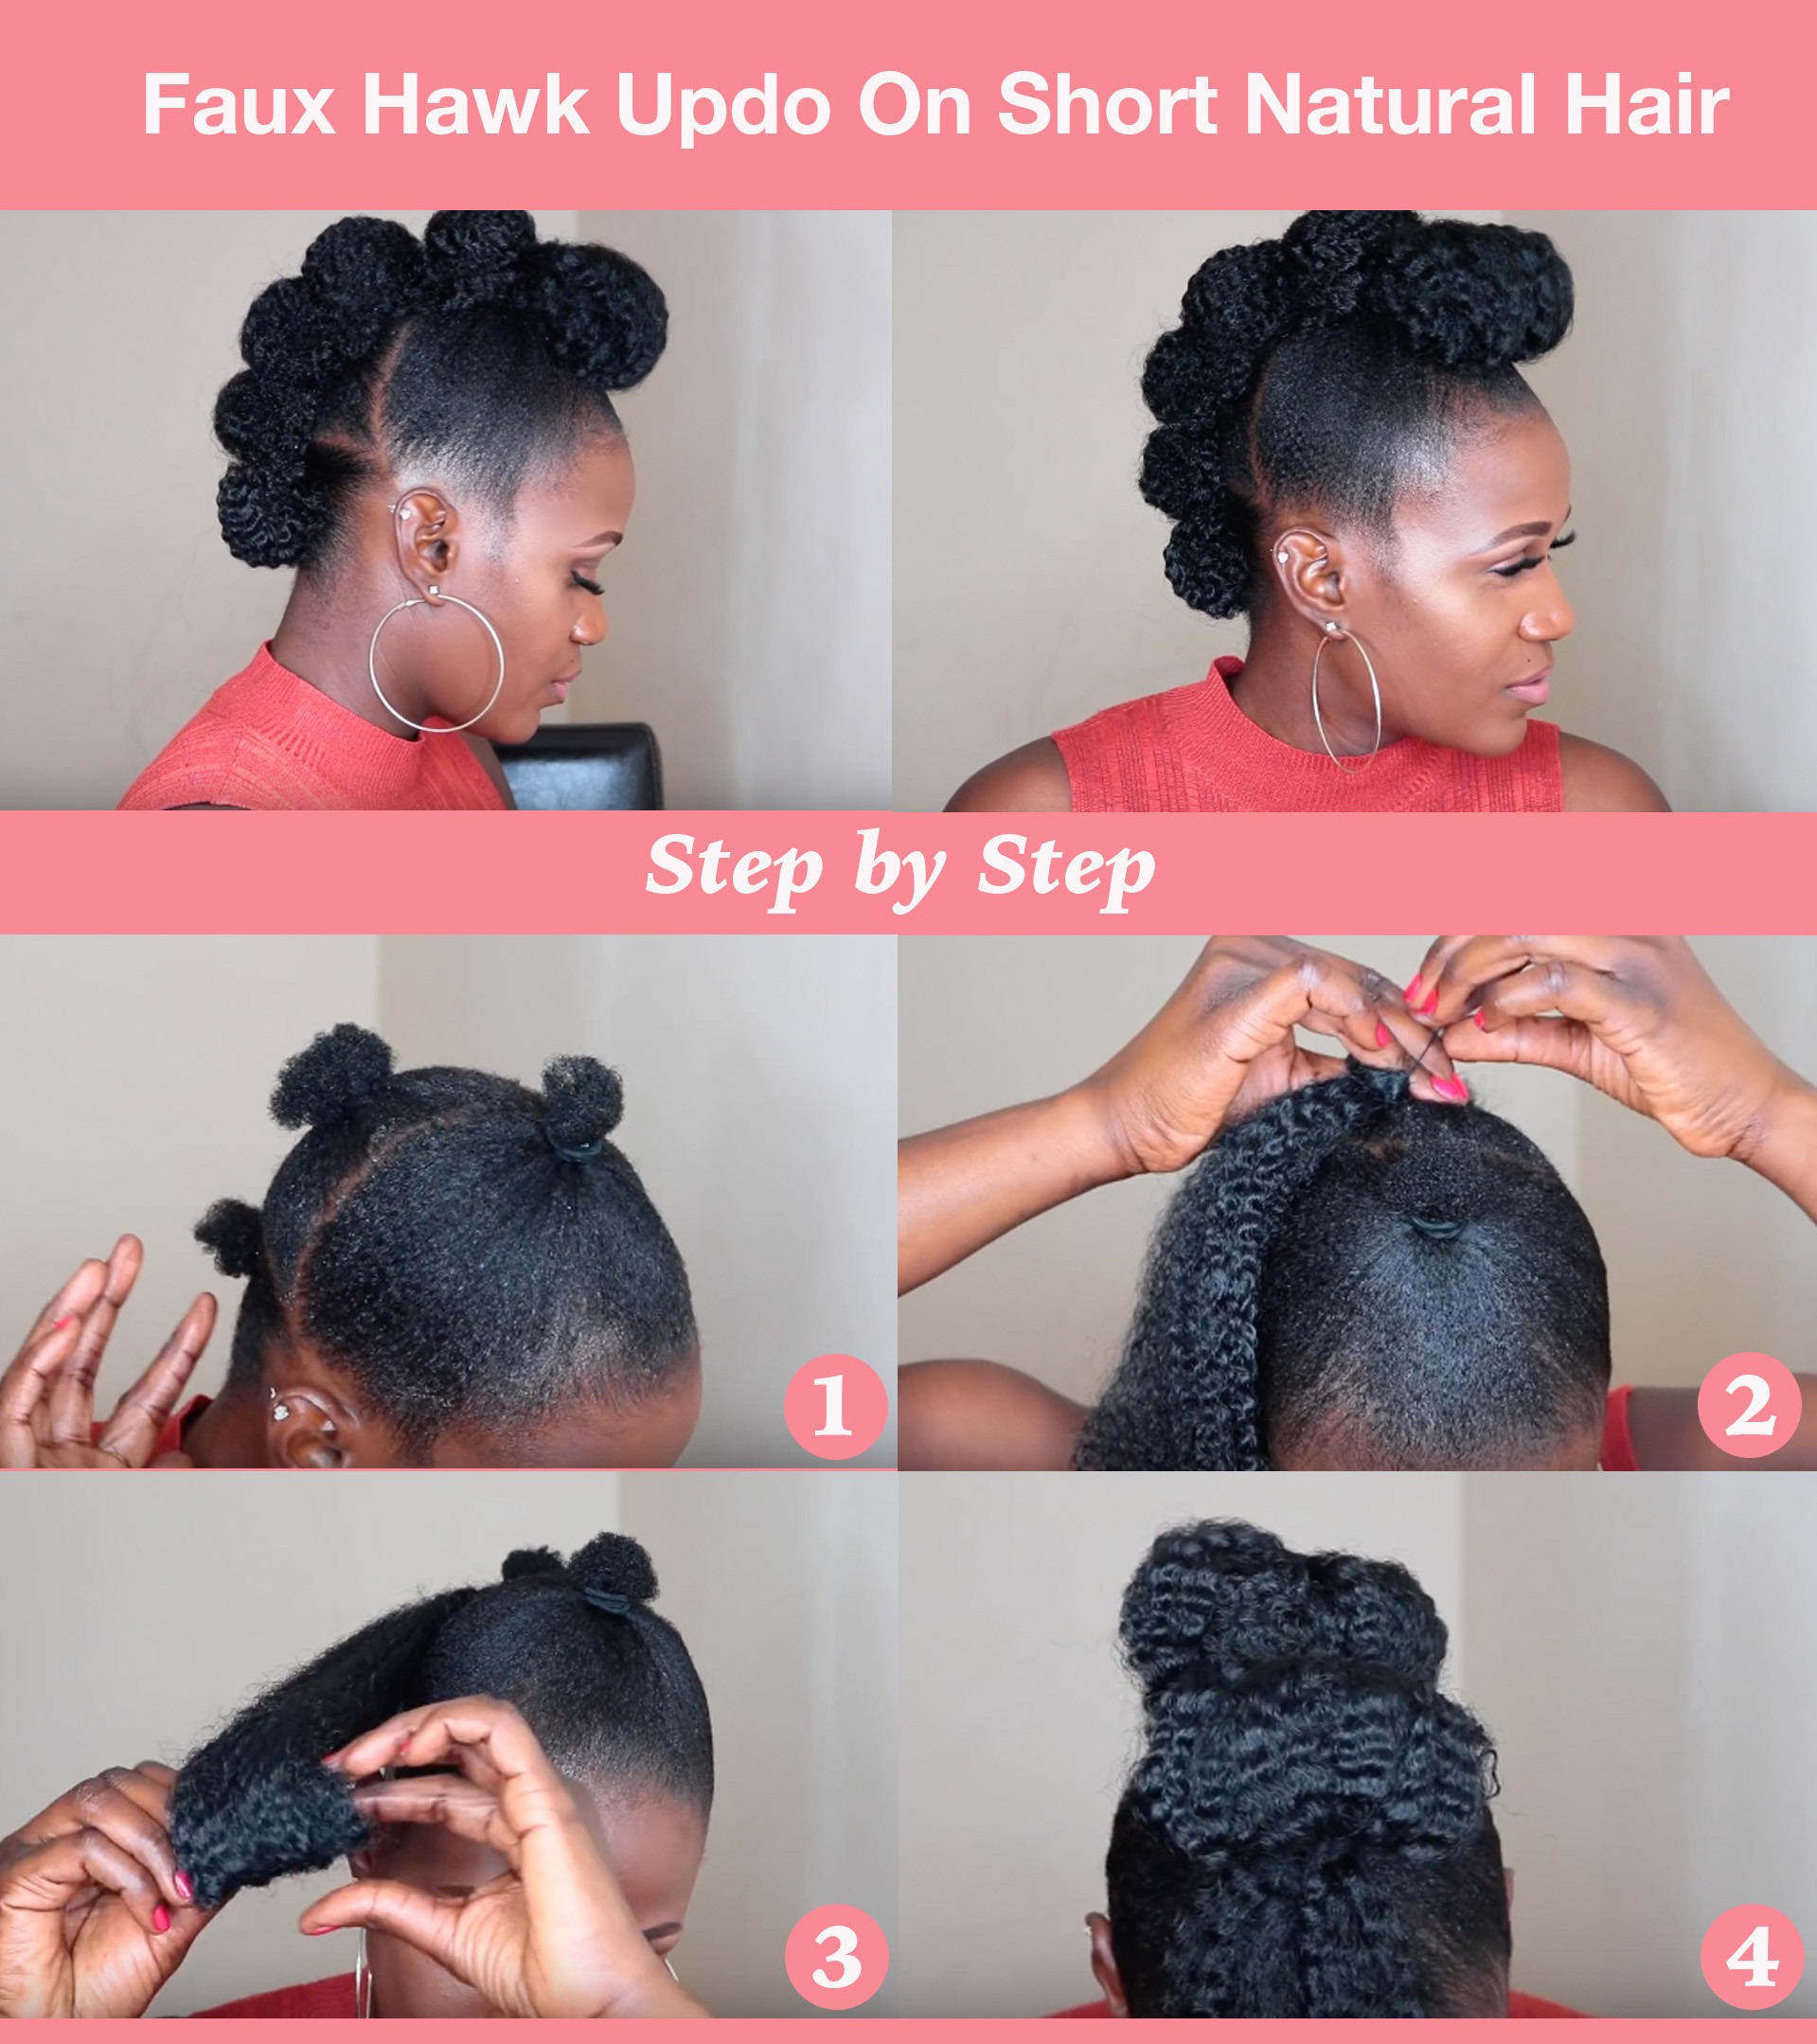 FauxHawkUpdo - TOP 6 Quick & Easy Natural Hair Updos